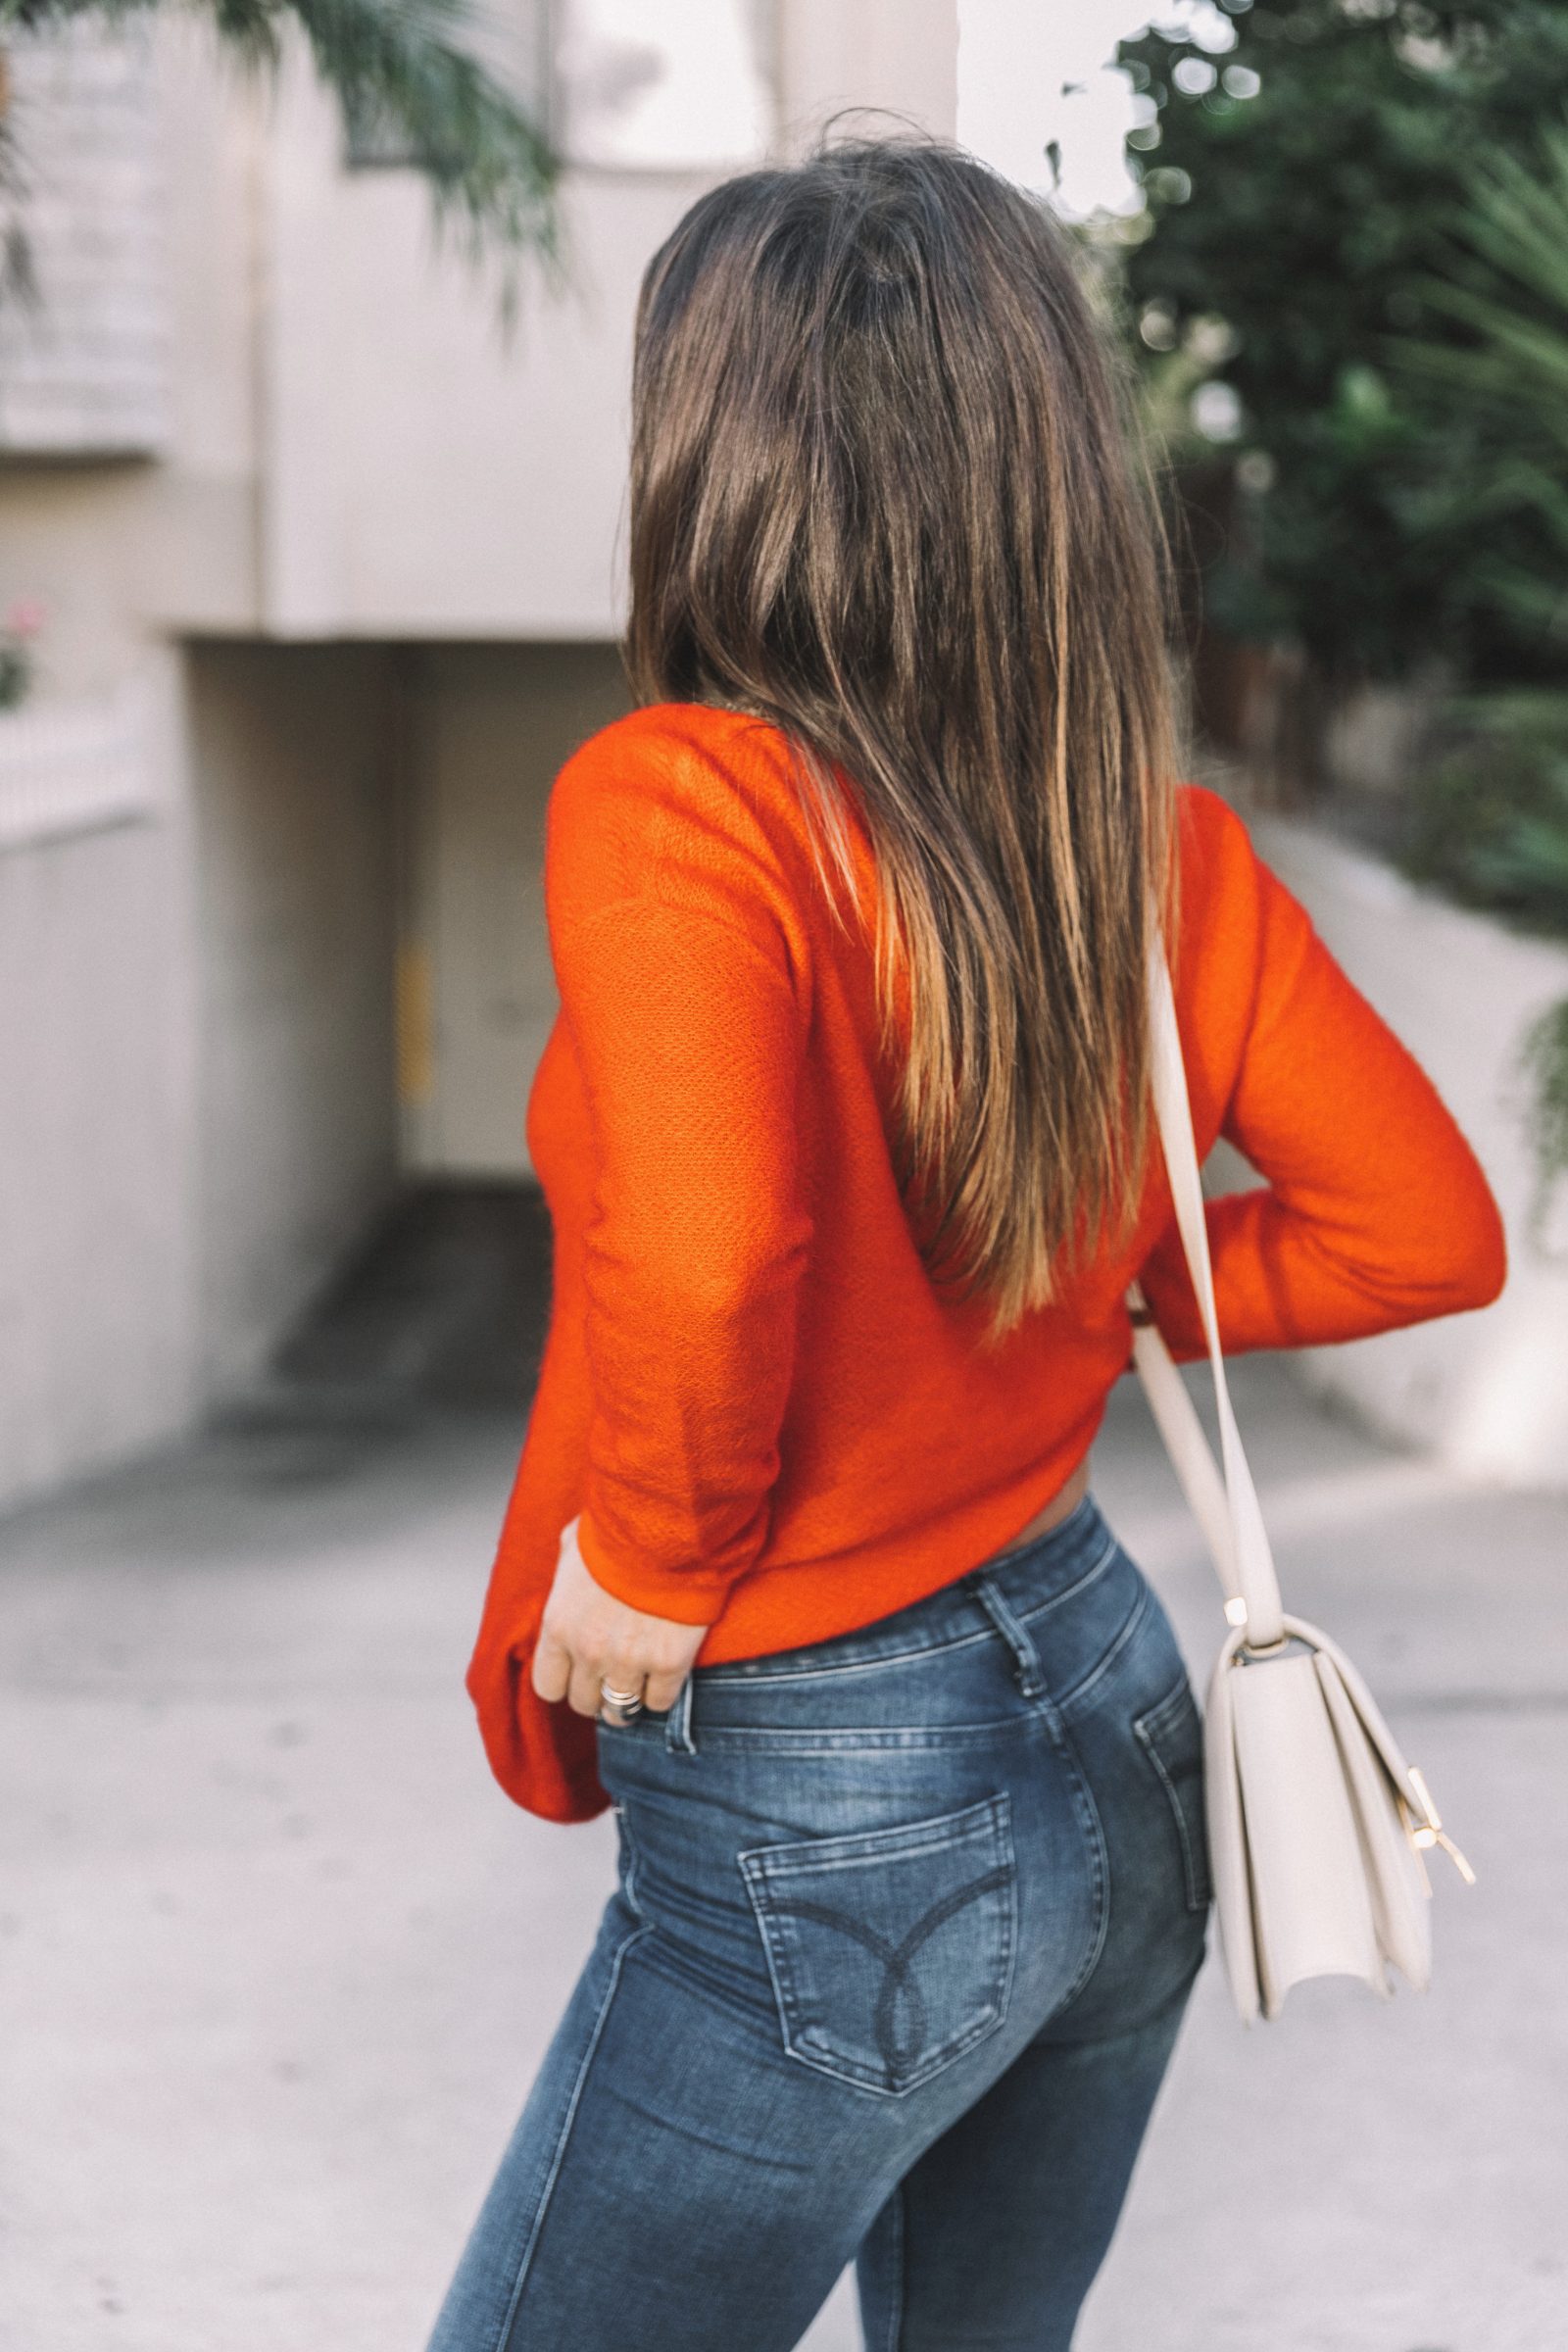 calvin_klein_outfit-ck_sculpted_jeans-denim-trench-orange_sweater-gold_shoes-celine_box_bag-outfit-street_style-los_angeles-collage_vintage-72